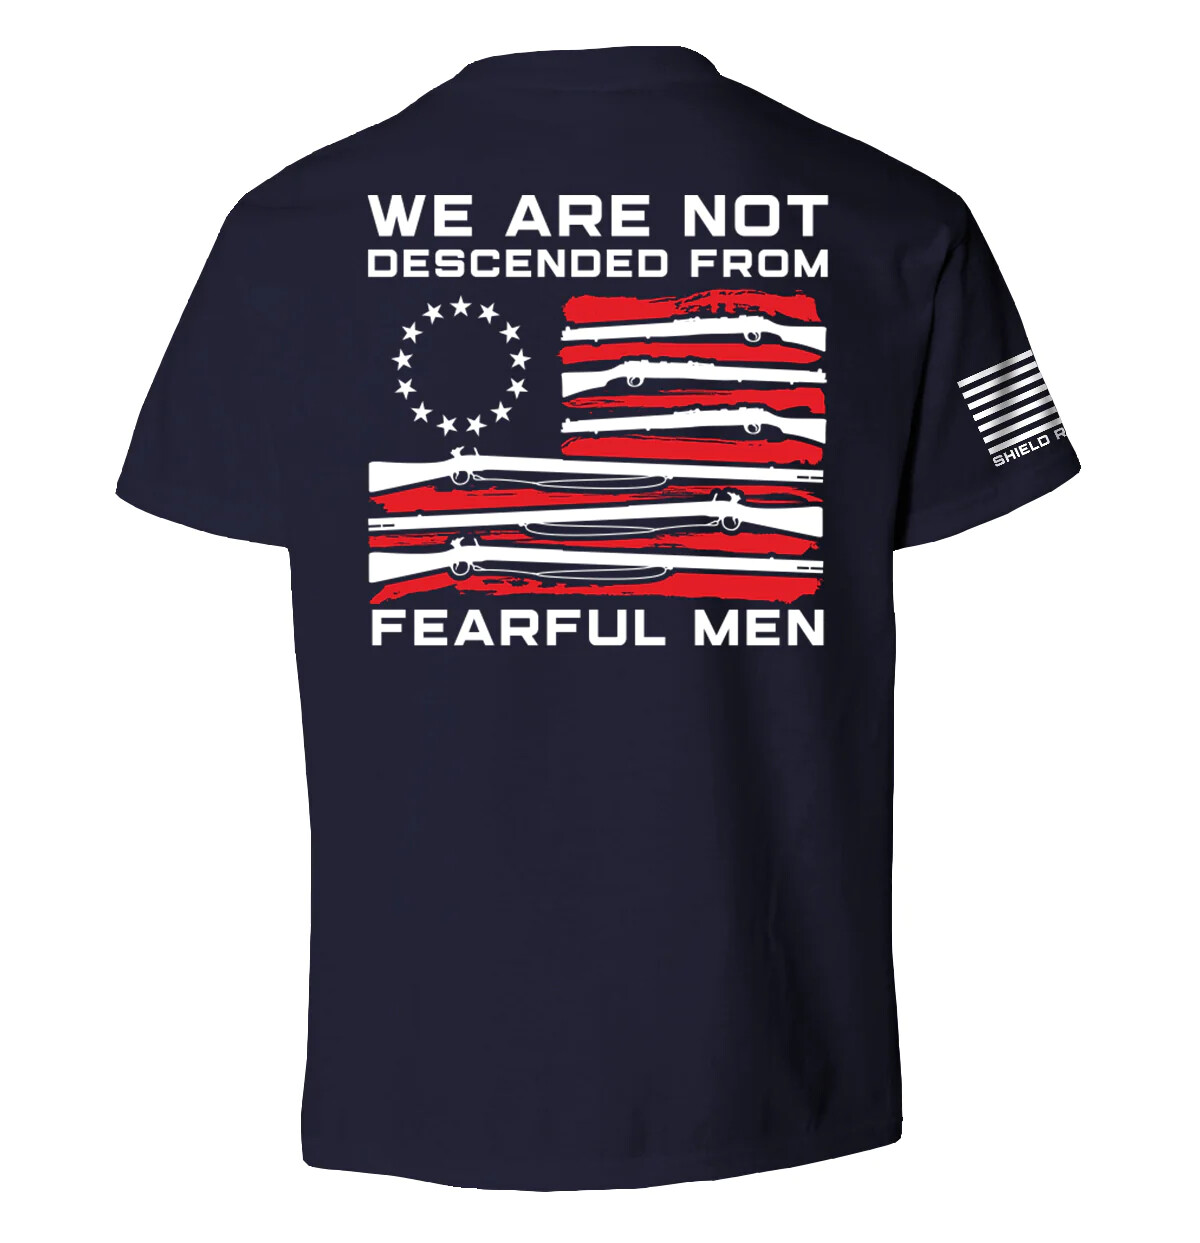 Not Descended From Fearful Men Youth Tee, Color: Navy, Size: MD